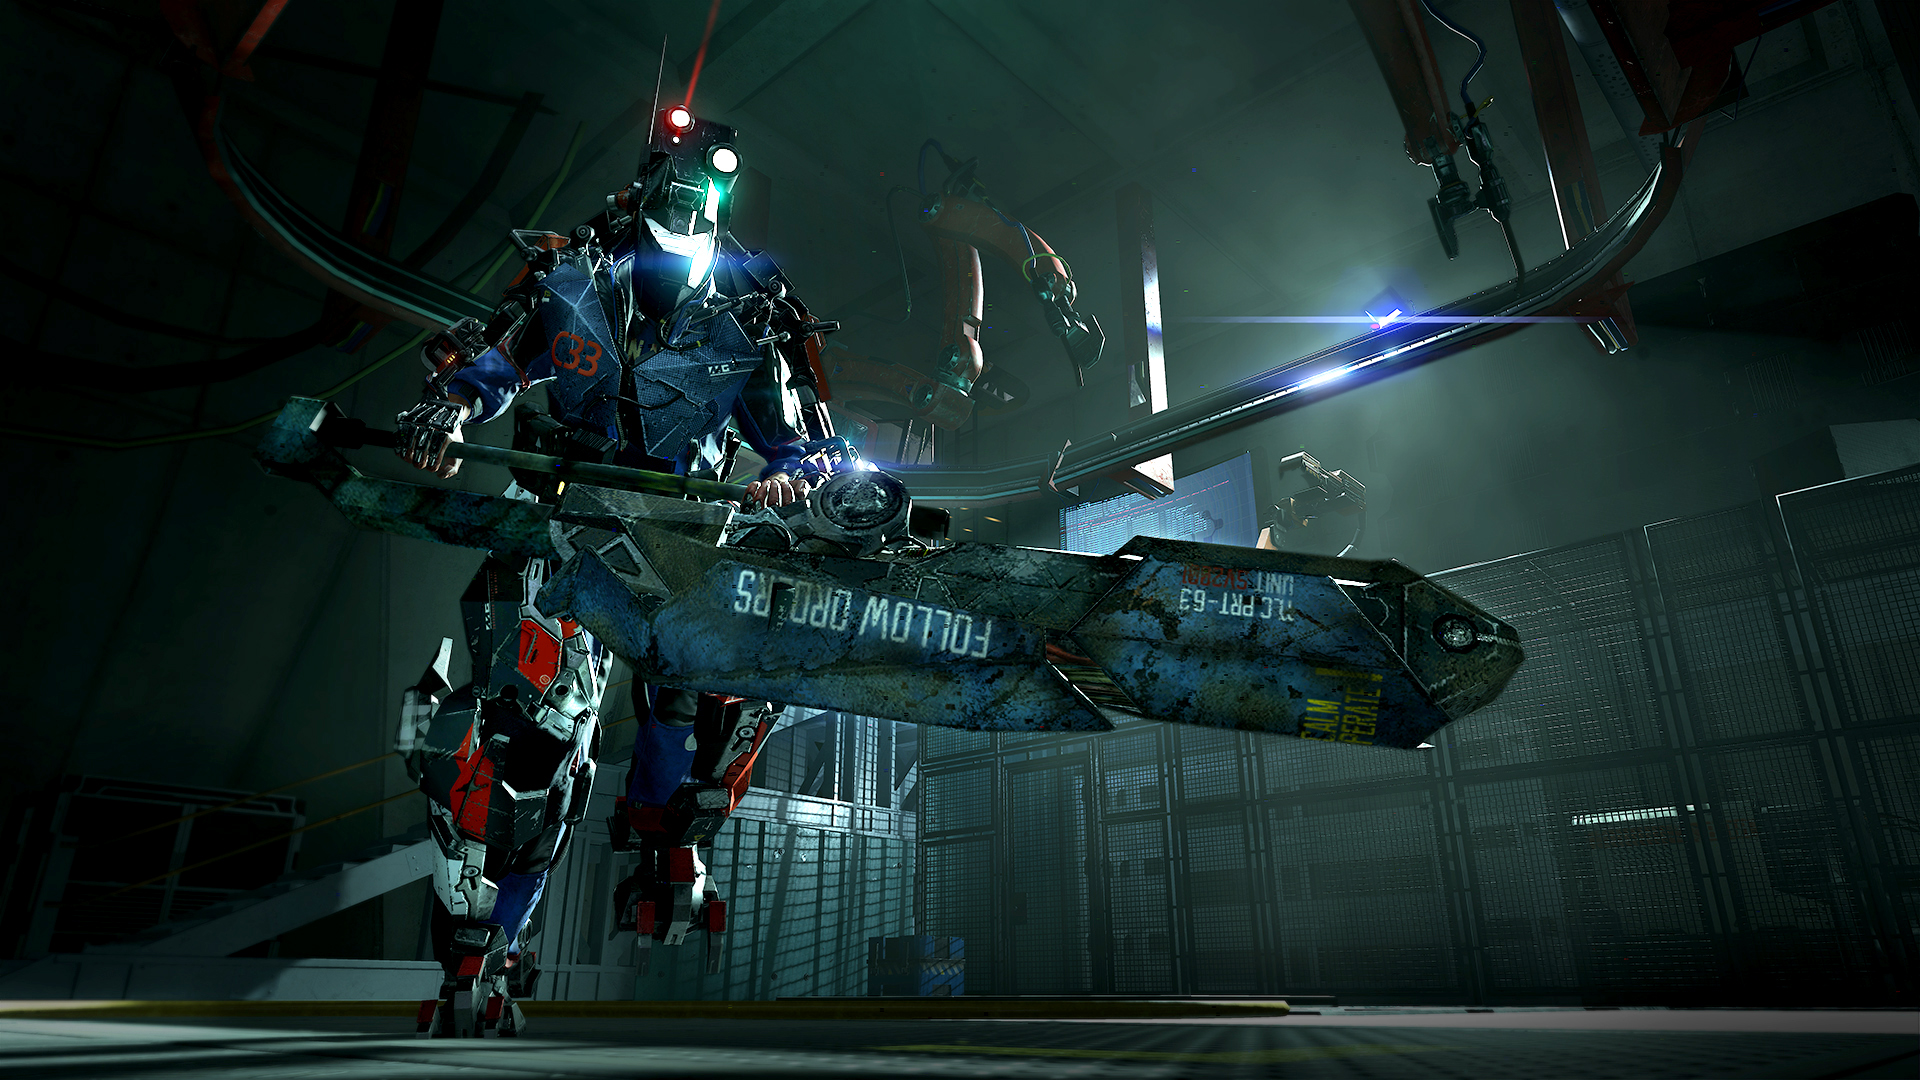 The Surge 2: Release Date, Trailer, and Everything We Know